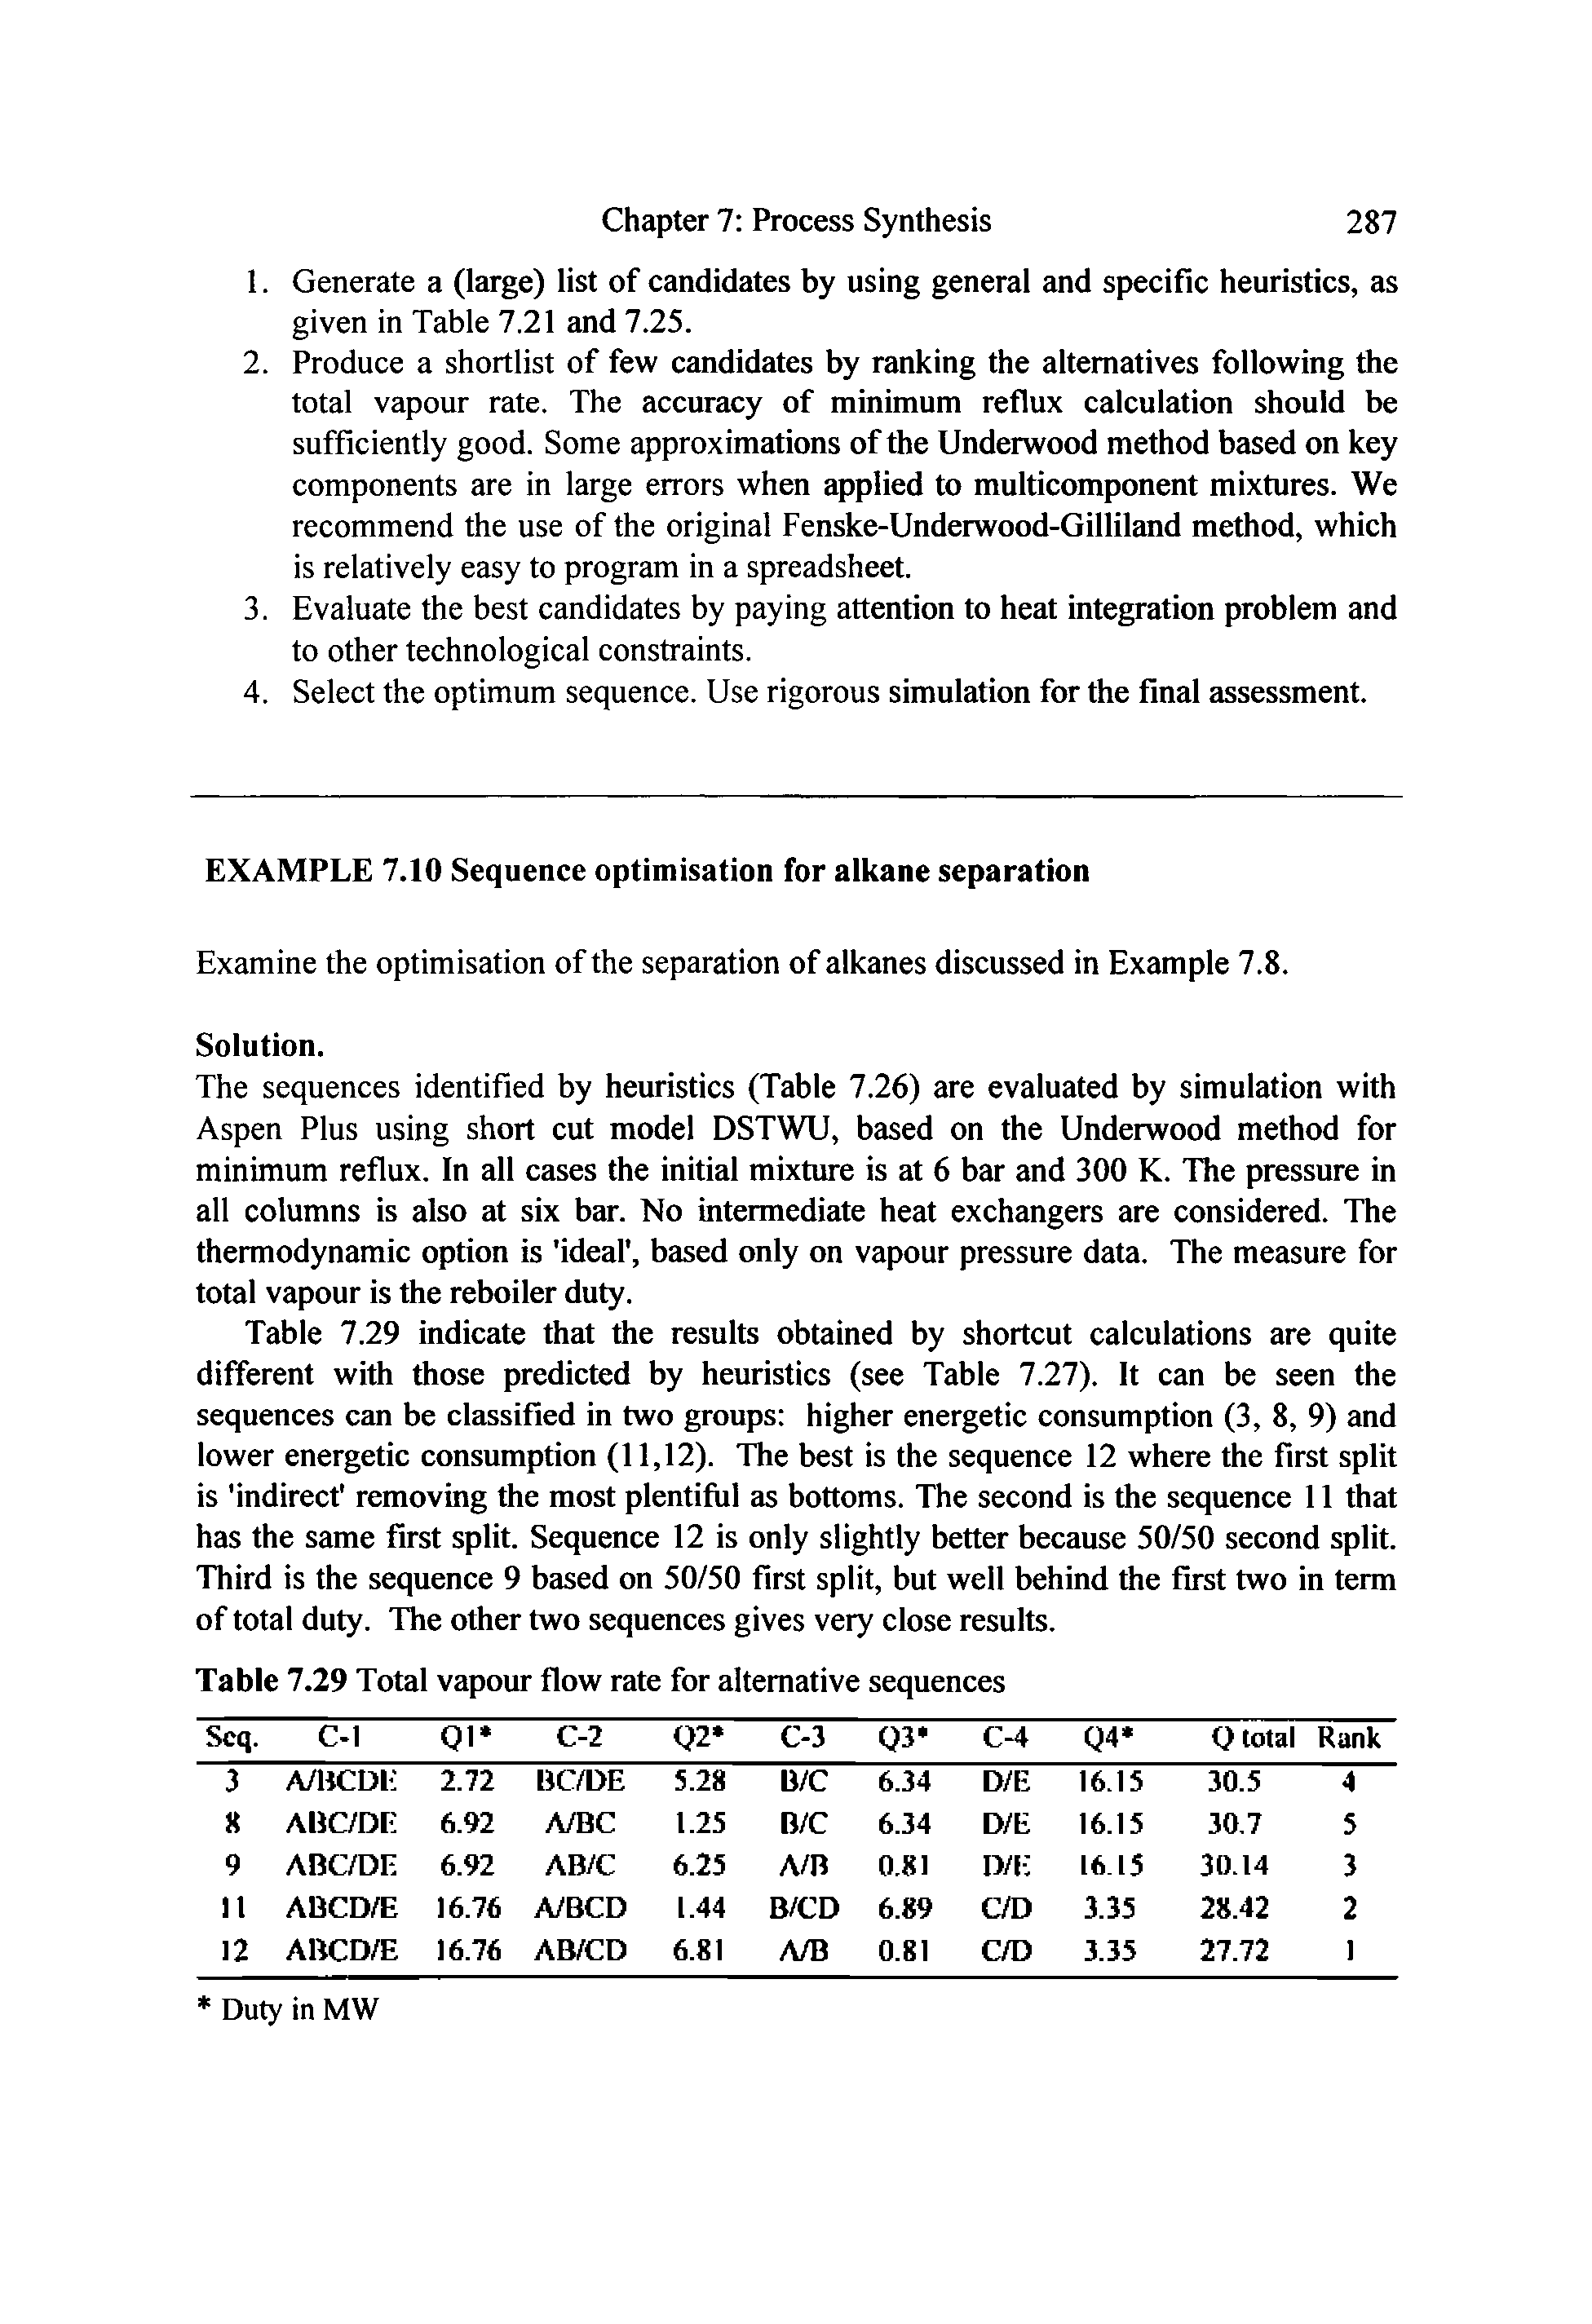 Table 7.29 indicate that the results obtained by shortcut calculations are quite different with those predicted by heuristics (see Table 7.27). It can be seen the sequences can be classified in two groups higher energetic consumption (3, 8, 9) and lower energetic consumption (11,12). The best is the sequence 12 where the first split is indirect removing the most plentiful as bottoms. The second is the sequence 11 that has the same first split. Sequence 12 is only slightly better because 50/50 second split. Third is the sequence 9 based on 50/50 first split, but well behind the first two in term of total duty. The other two sequences gives very close results.